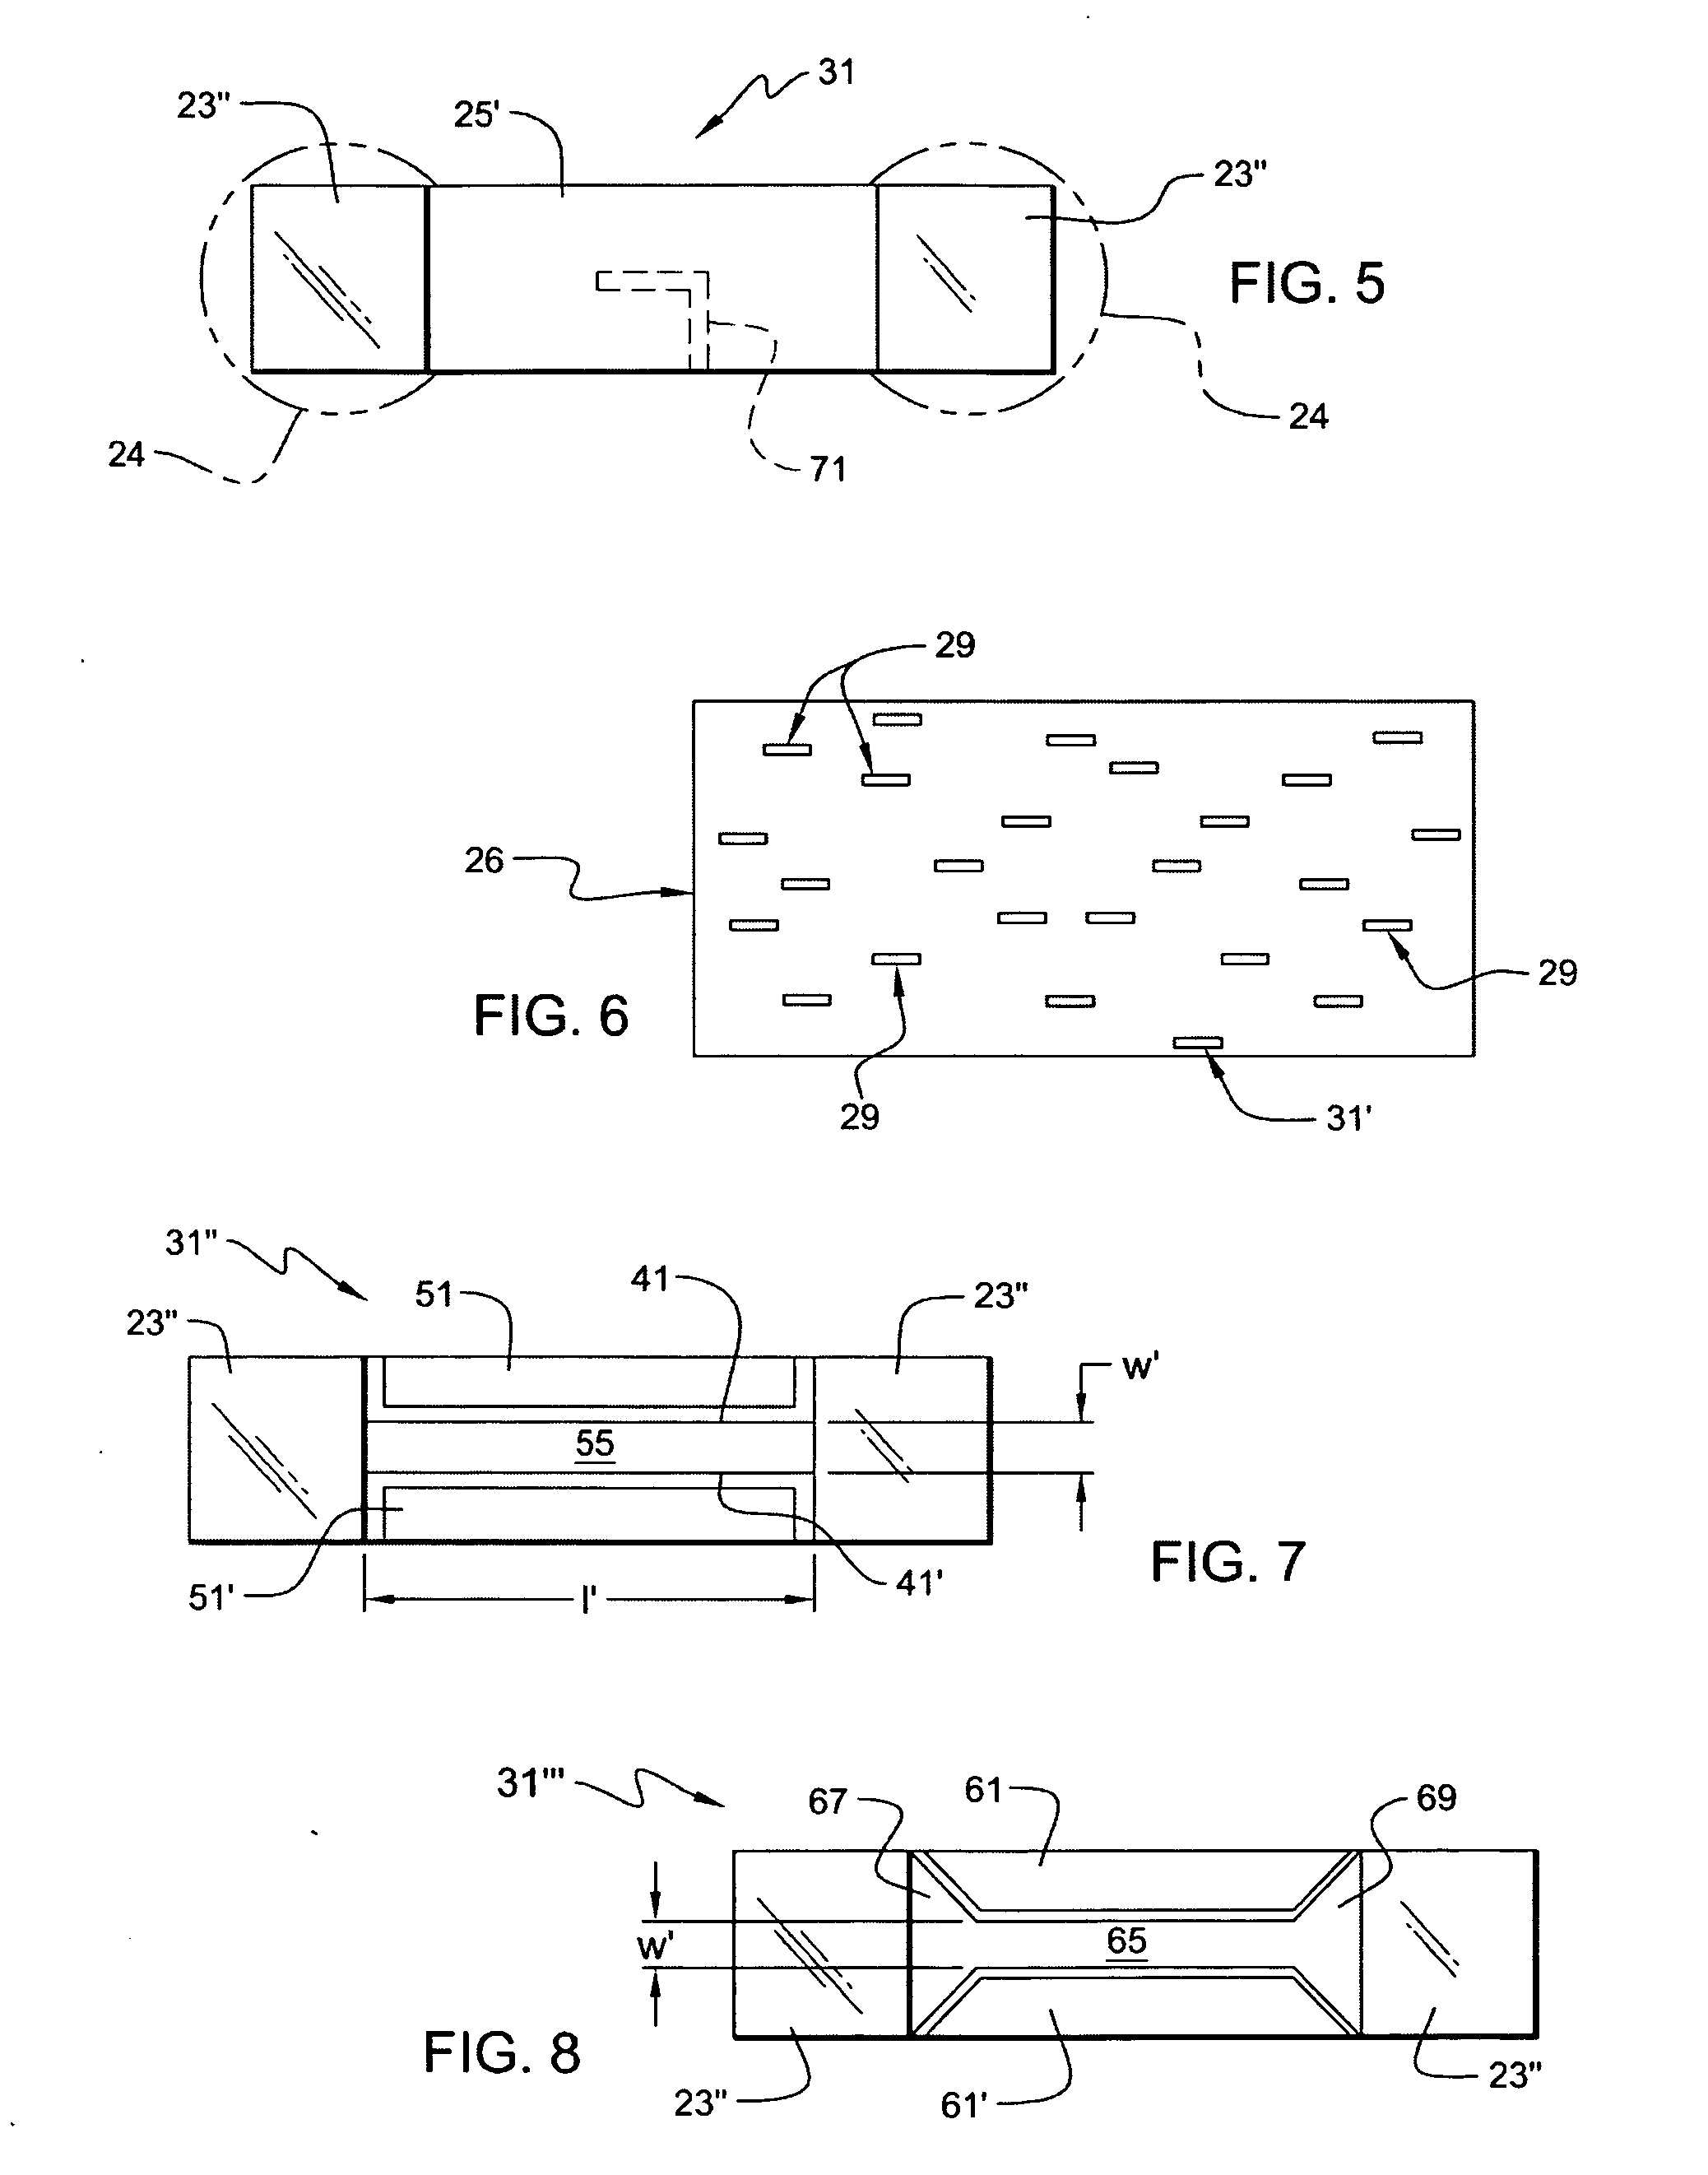 Method of making circuitized substrates having film resistors as part thereof